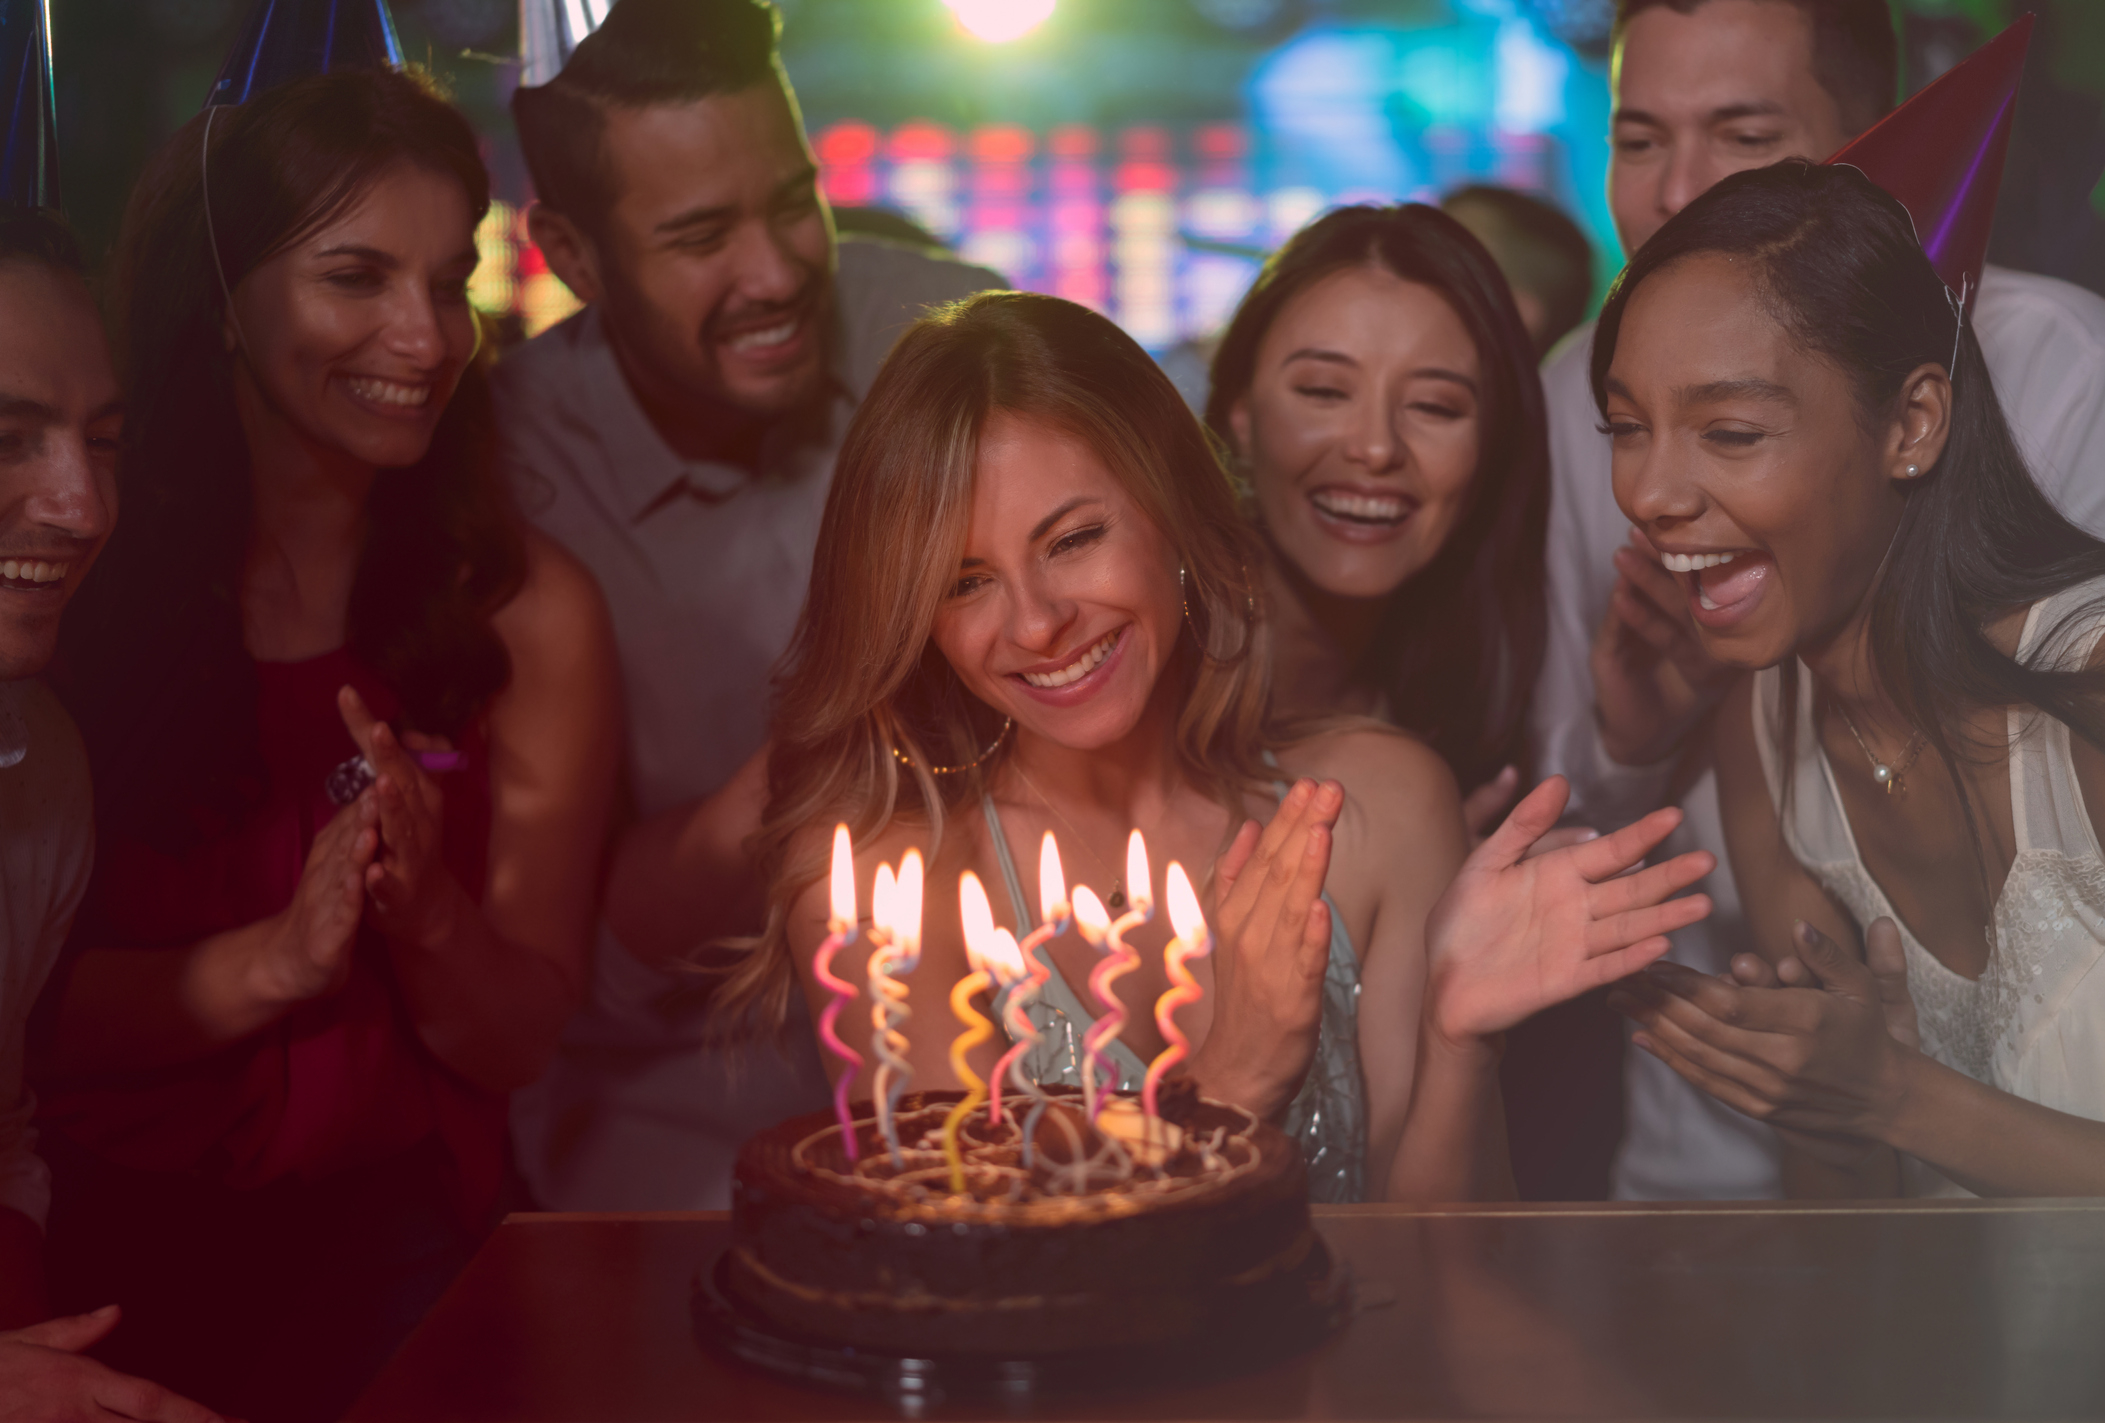 People singing happy birthday to a woman with a cake with candles in front of her